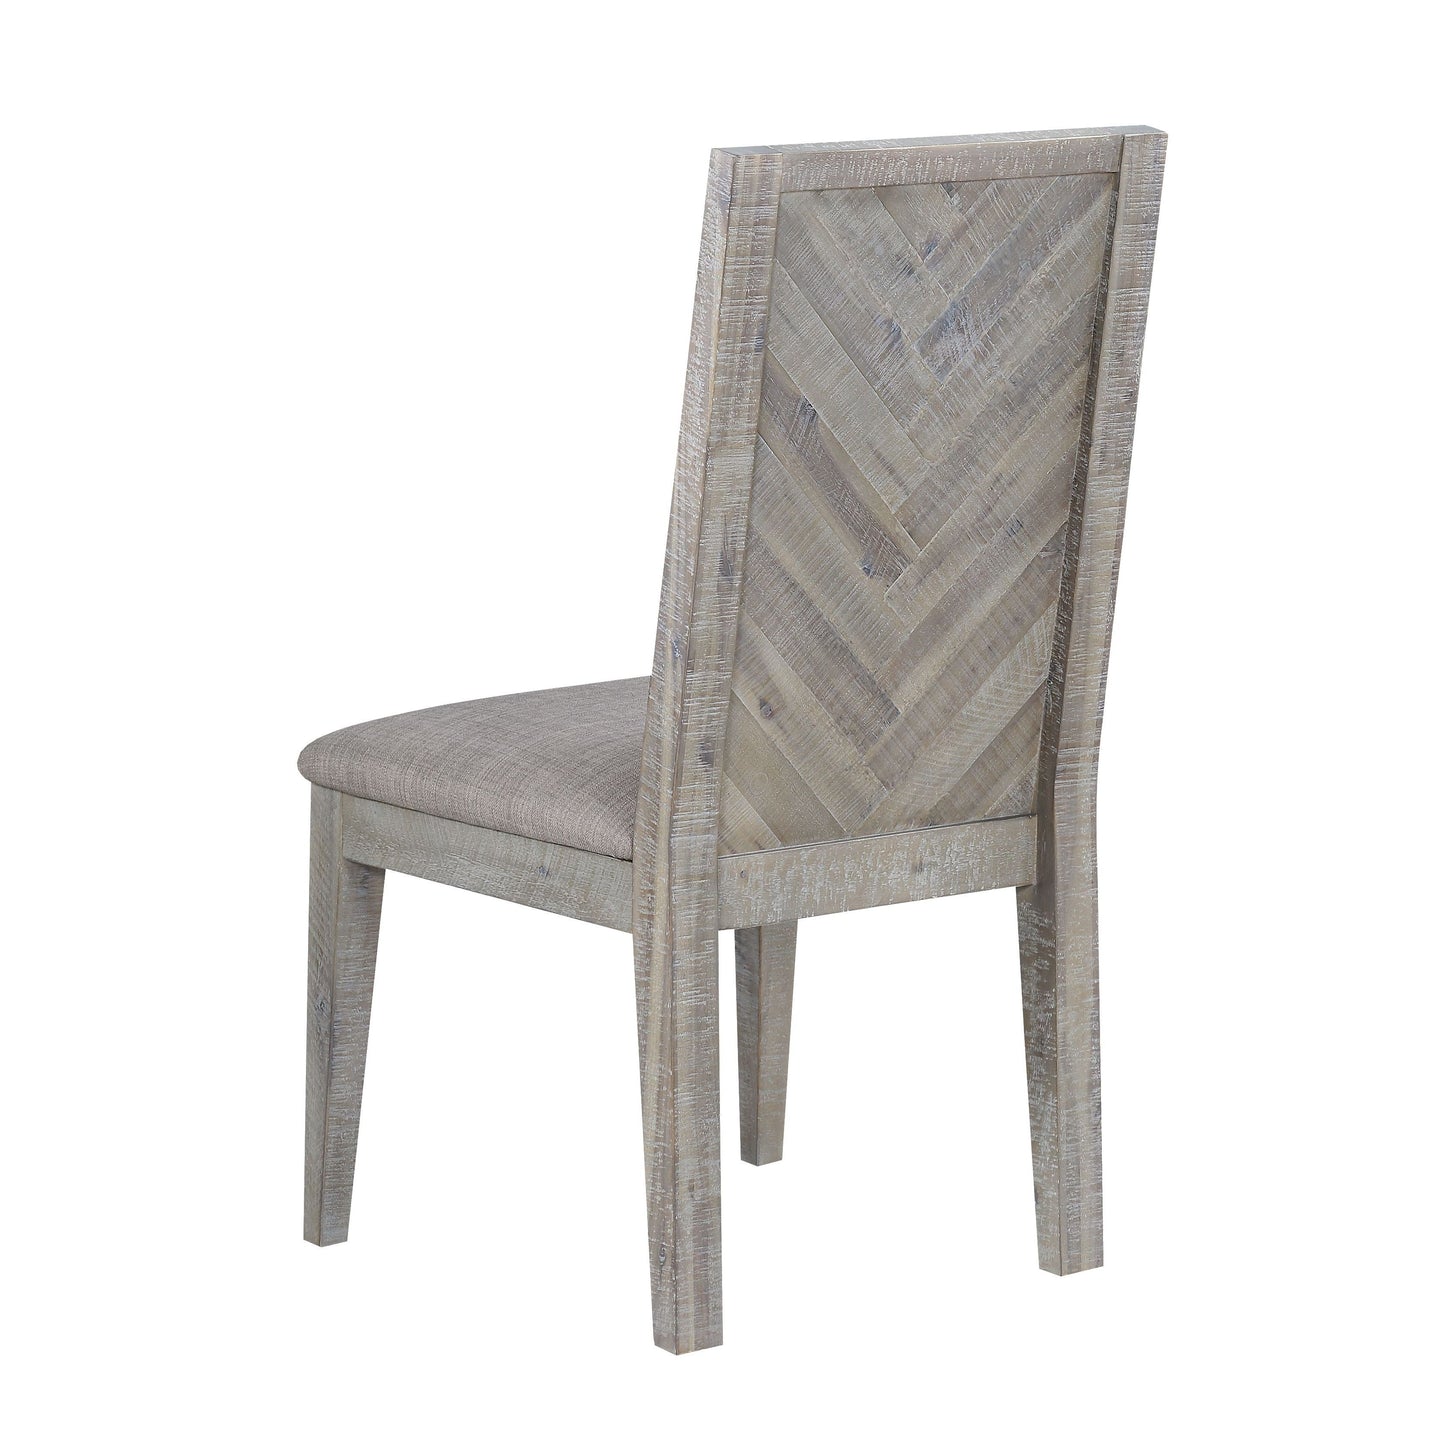 Modus Alexandra Upholstered Chair in Rusic Latte